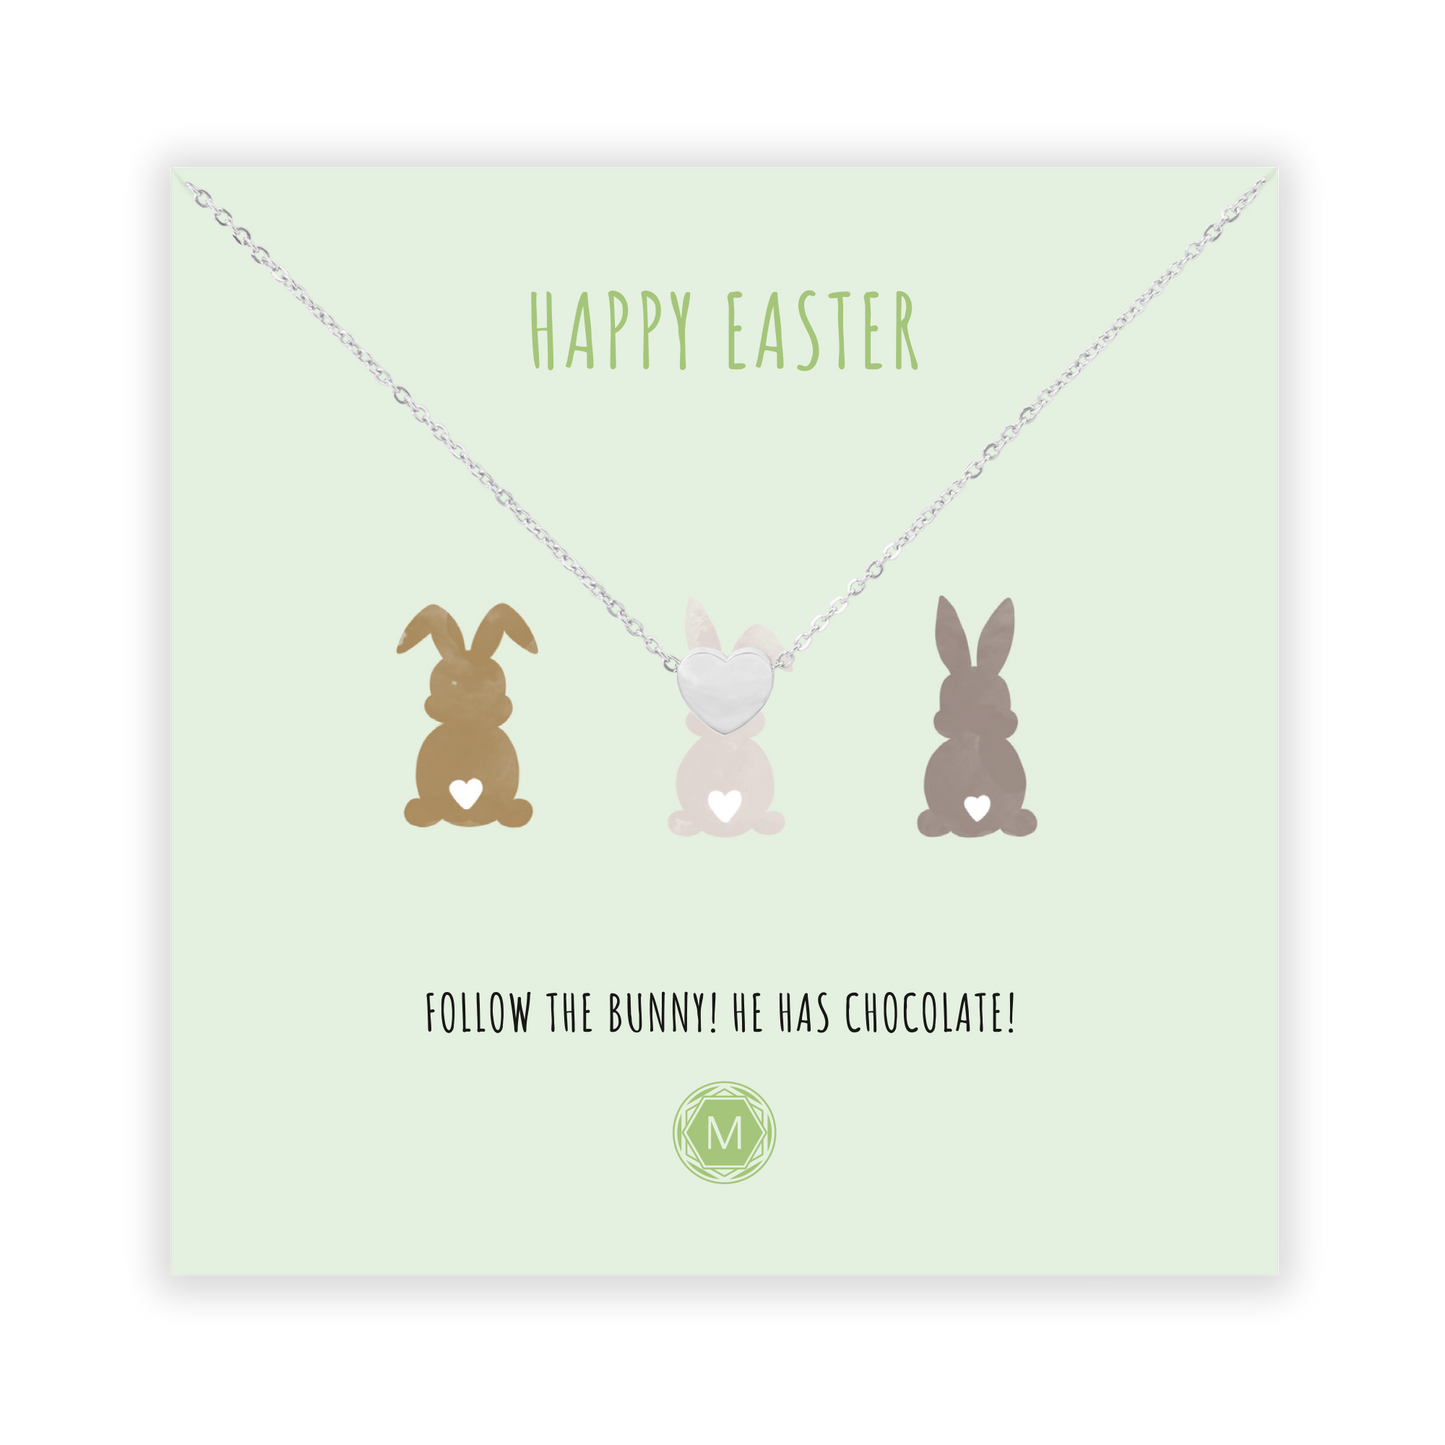 HAPPY EASTER Necklace